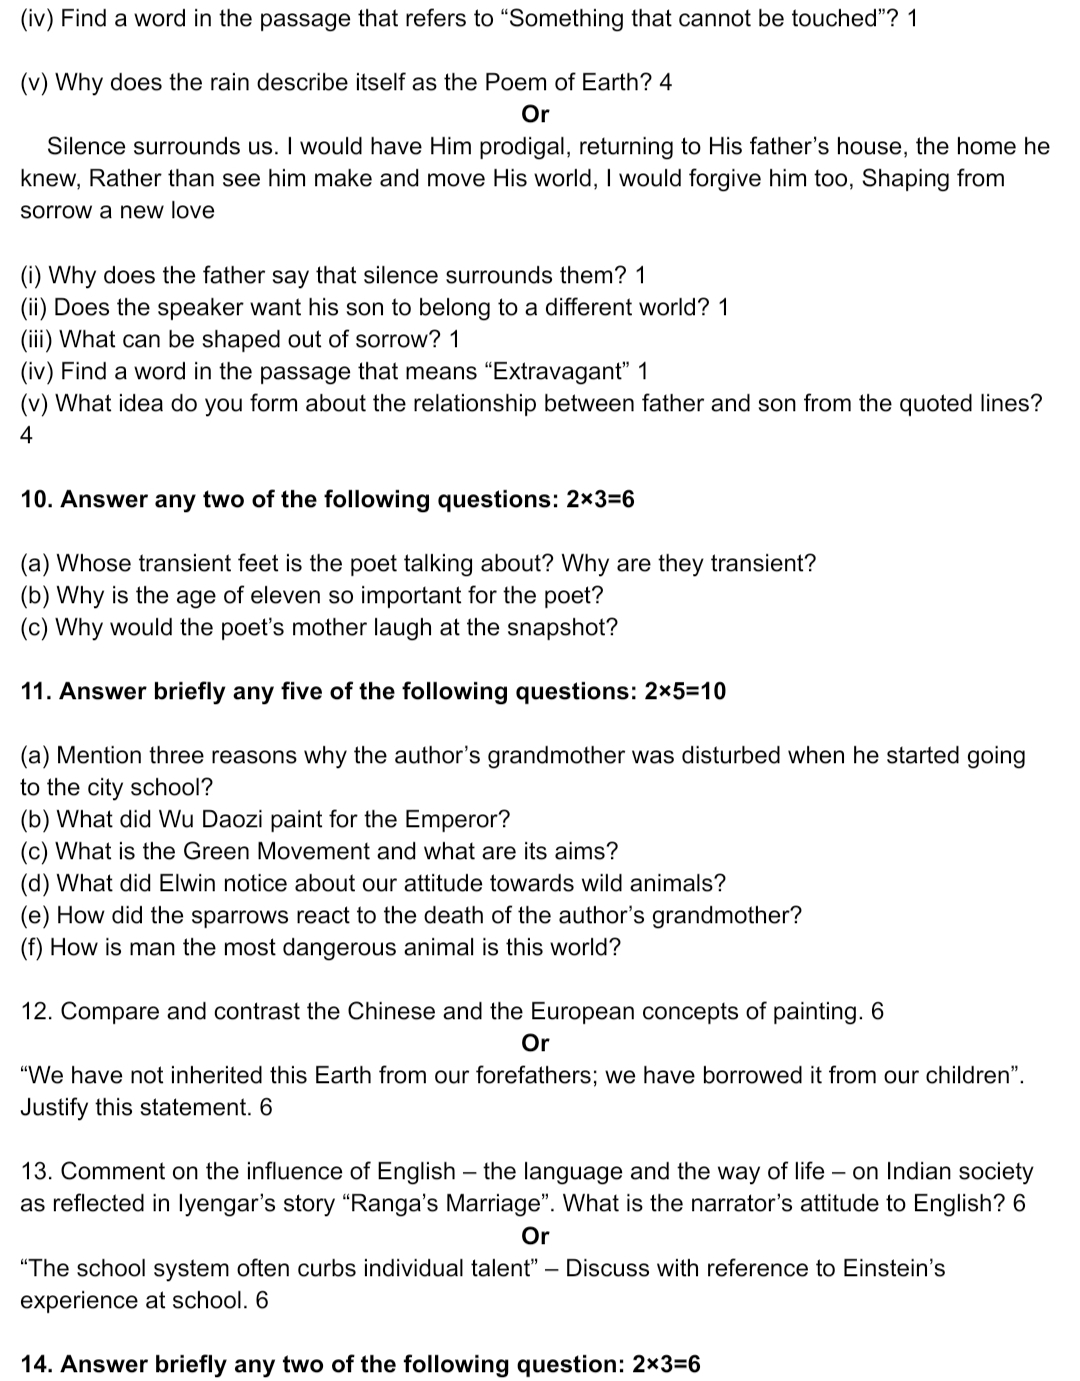 AHSEC Class 11 English Question paper'2016 | HS 1st Year English Question paper '2016, Download Assam Class 11 English Question paper 2016,Hs 1st year English Question paper